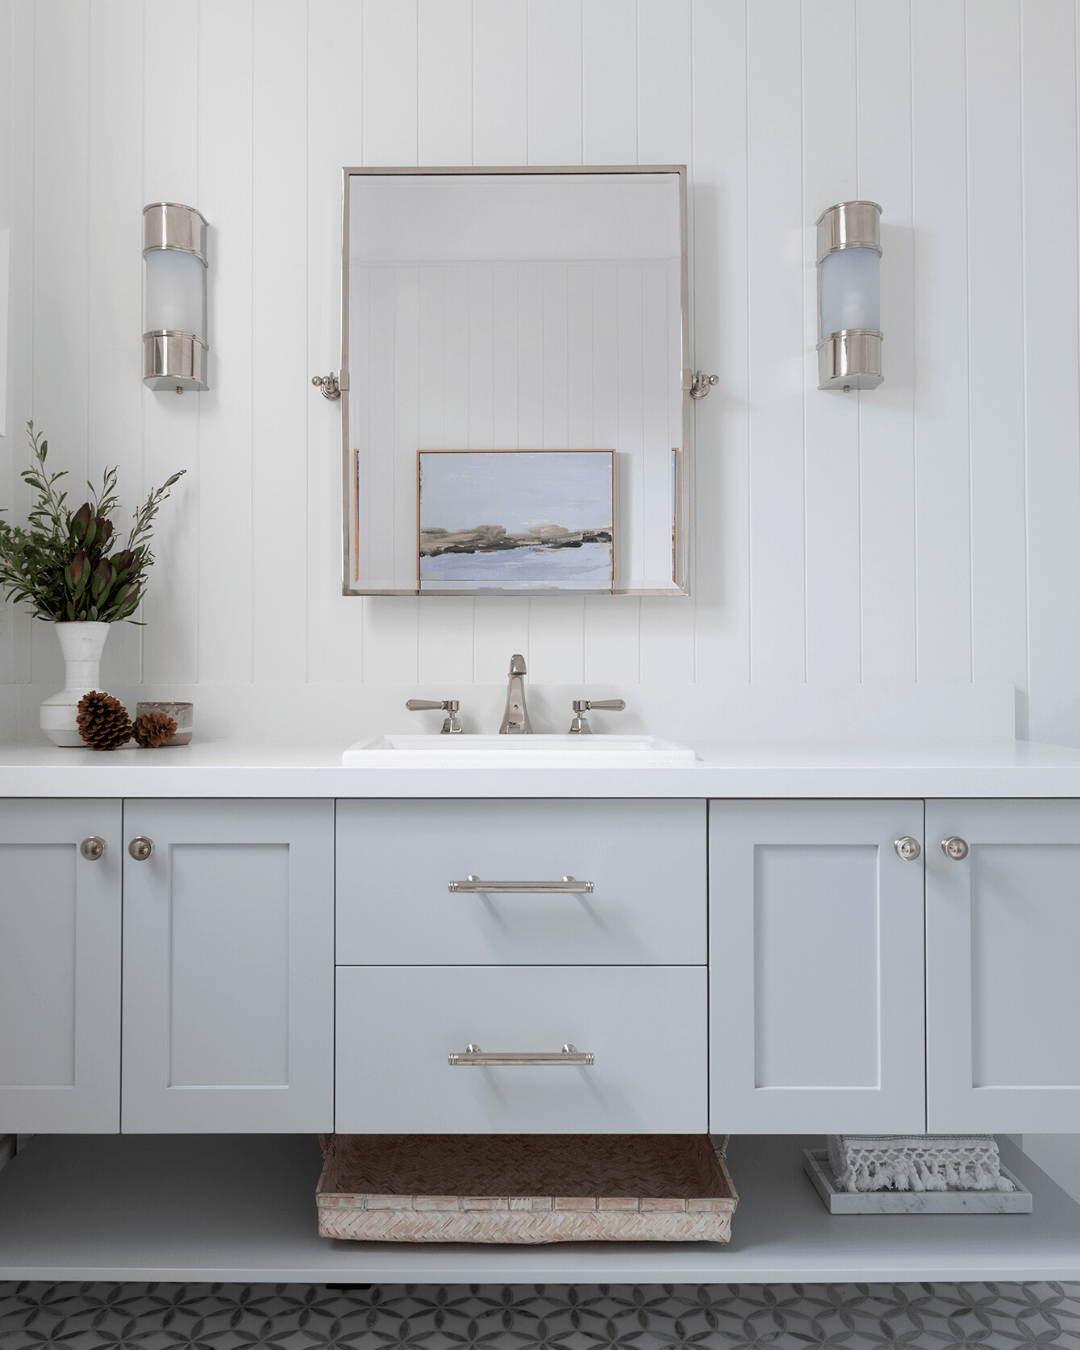 3 Bathrooms We Love for 2020 and Beyond - Armac Martin